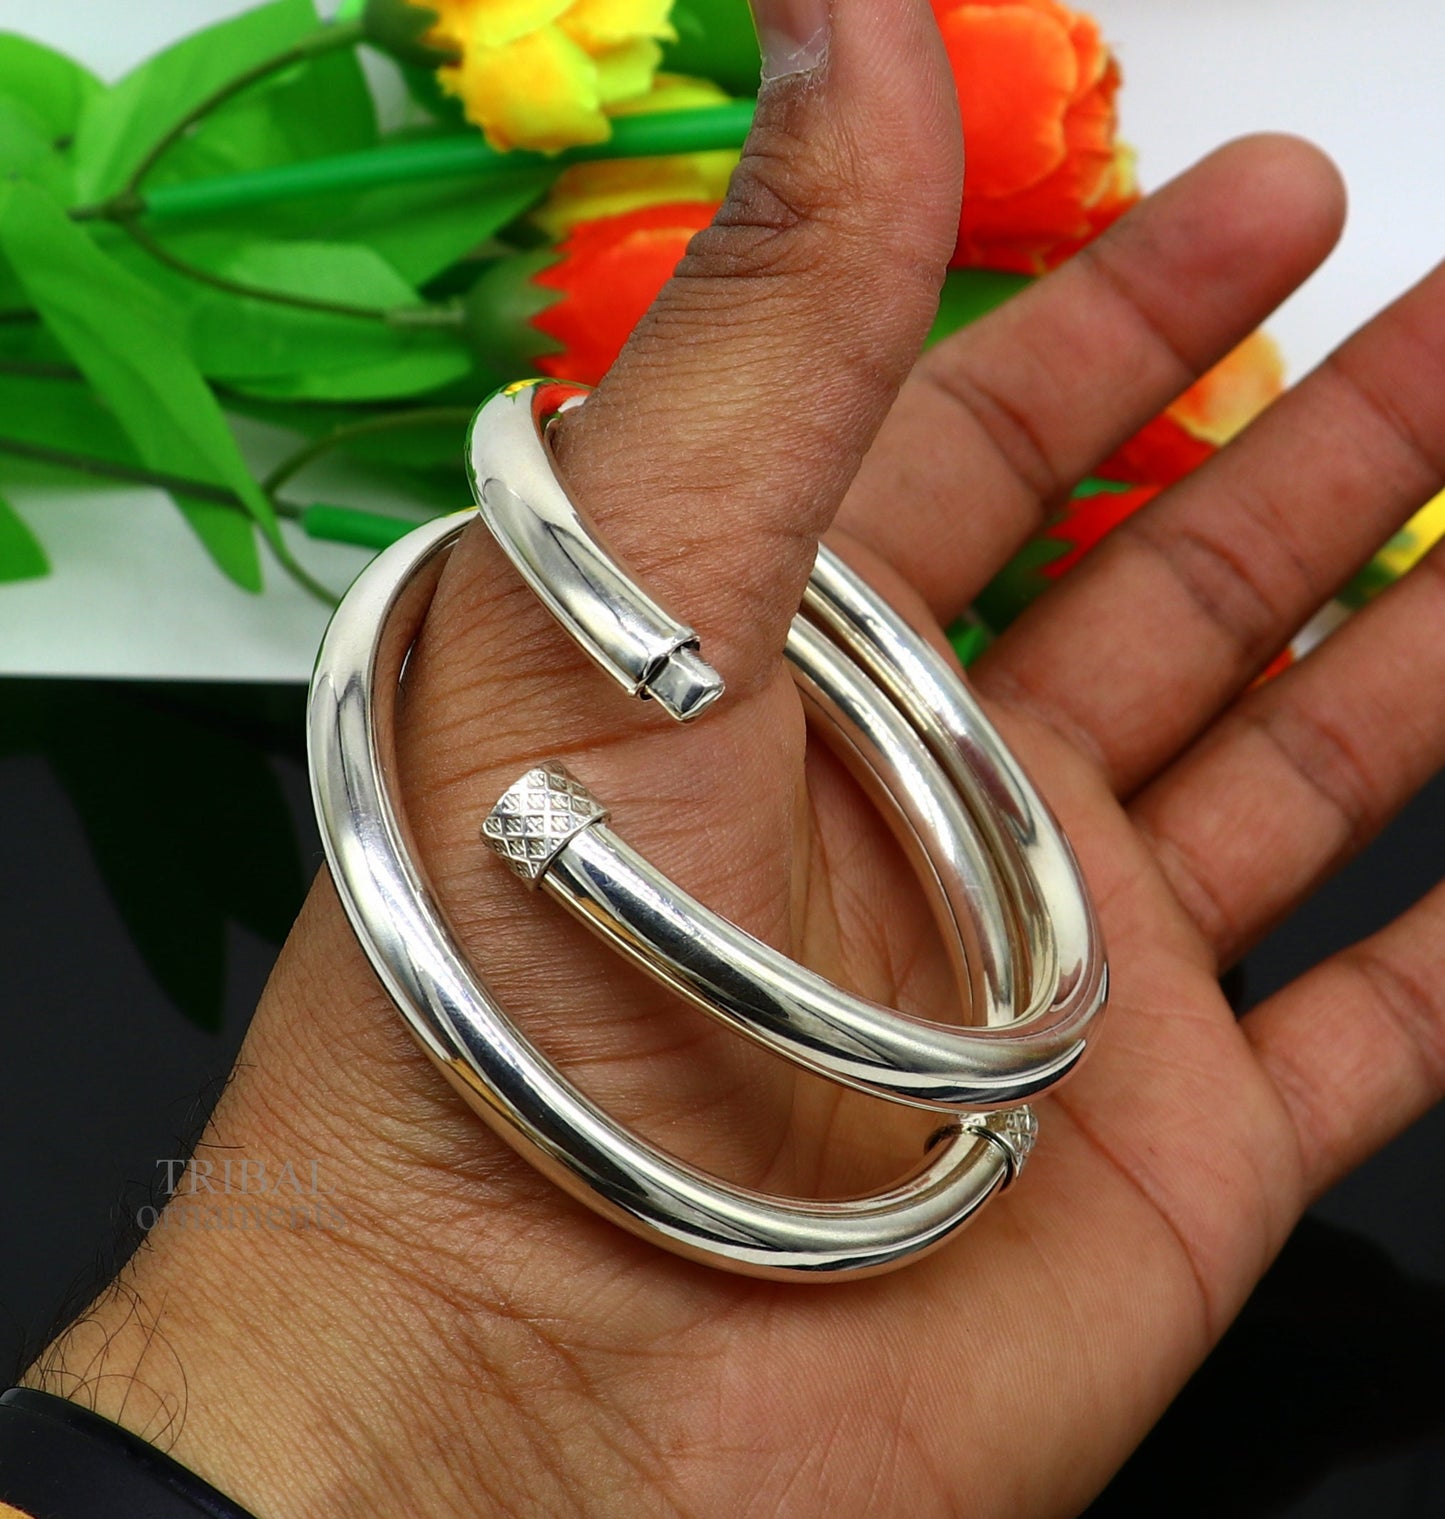 925 sterling silver plain shiny bright bangle bracelet kada, excellent personalized gifting stylish fancy bangle for girls nba268 - TRIBAL ORNAMENTS